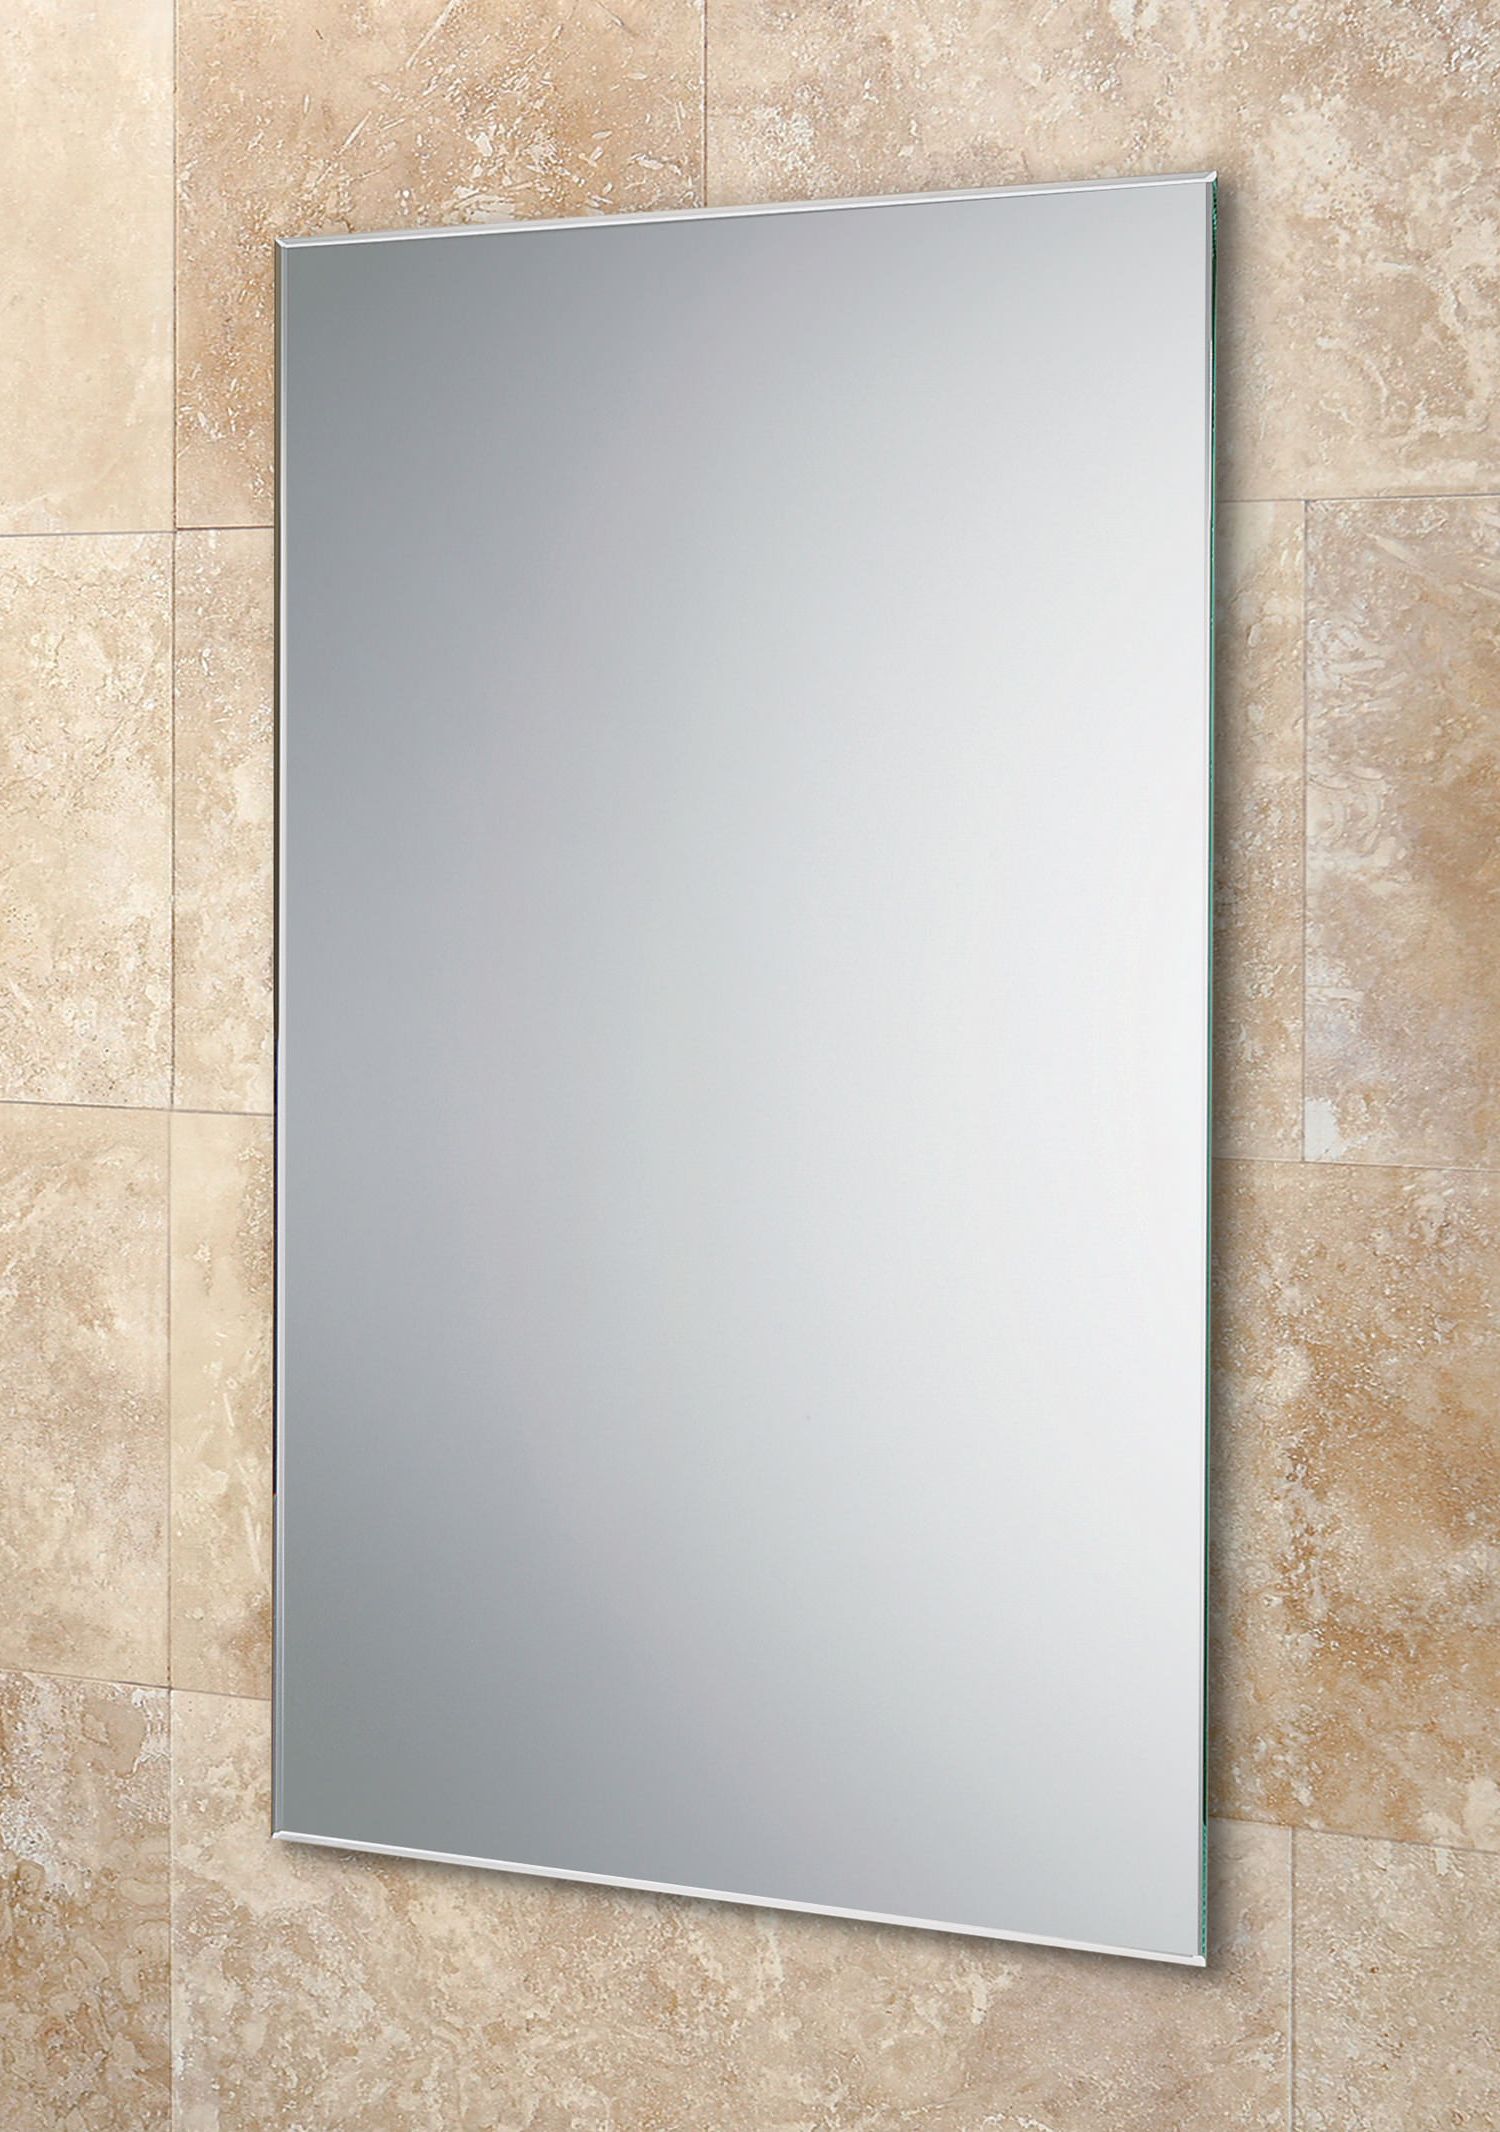 Rectangular Chevron Edge Wall Mirrors Within Best And Newest Hib Johnson Rectangular Mirror With Bevelled Edges 400 X 600mm (View 8 of 15)